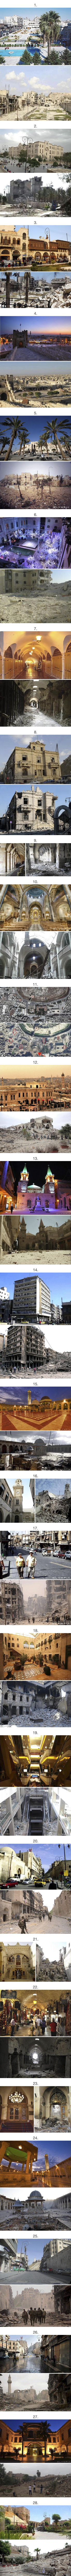 28 before and after pictures tell you what war did to the largest city in Syria